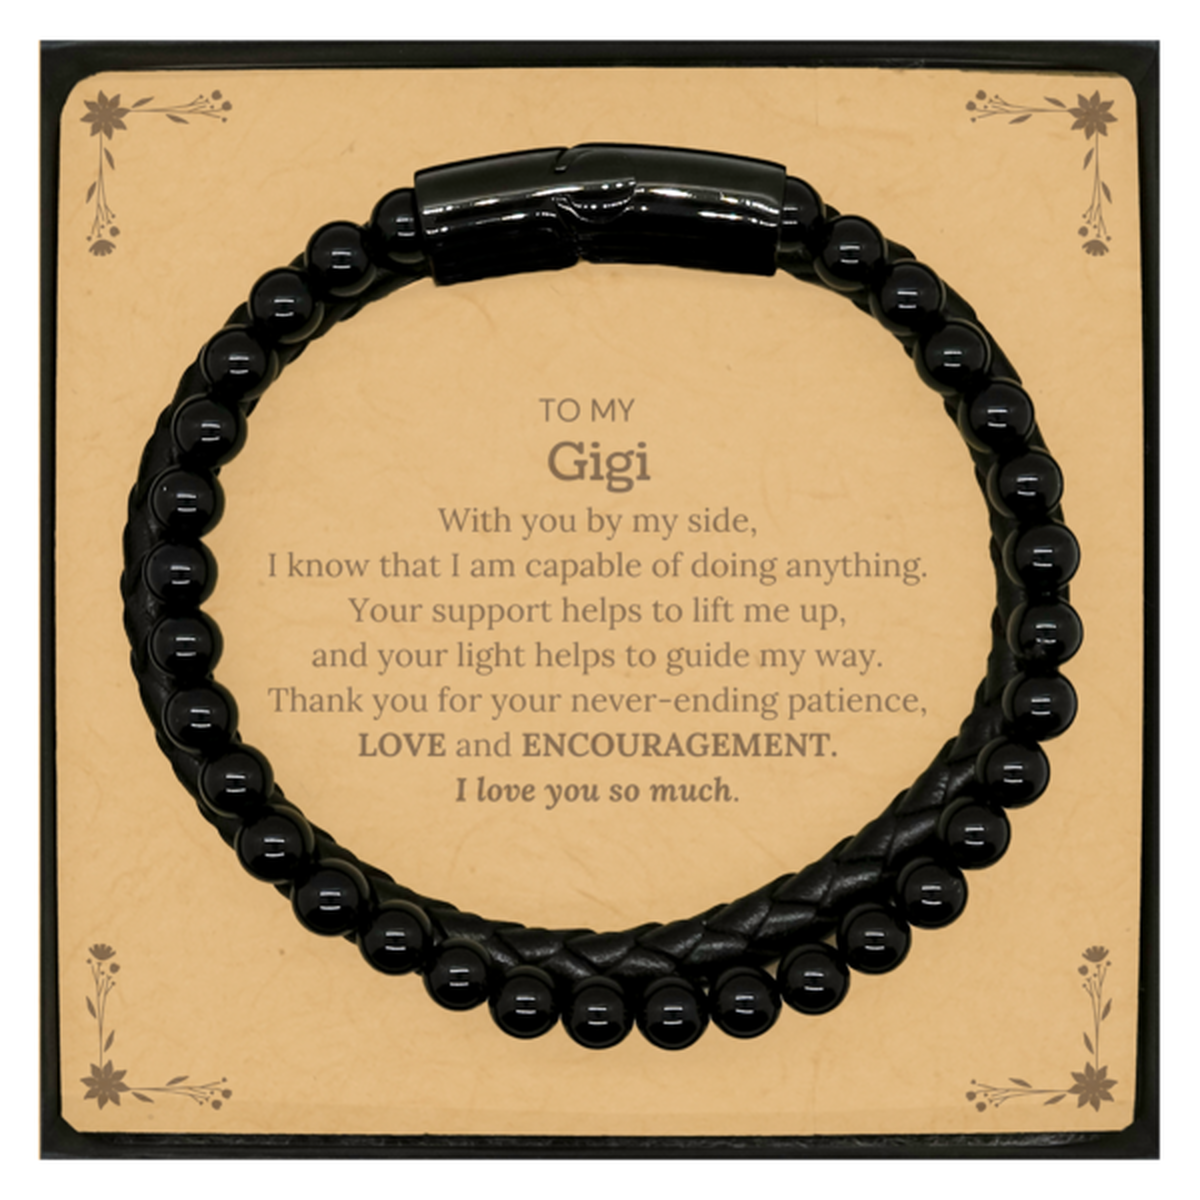 Appreciation Gigi Stone Leather Bracelets Gifts, To My Gigi Birthday Christmas Wedding Keepsake Gifts for Gigi With you by my side, I know that I am capable of doing anything. I love you so much